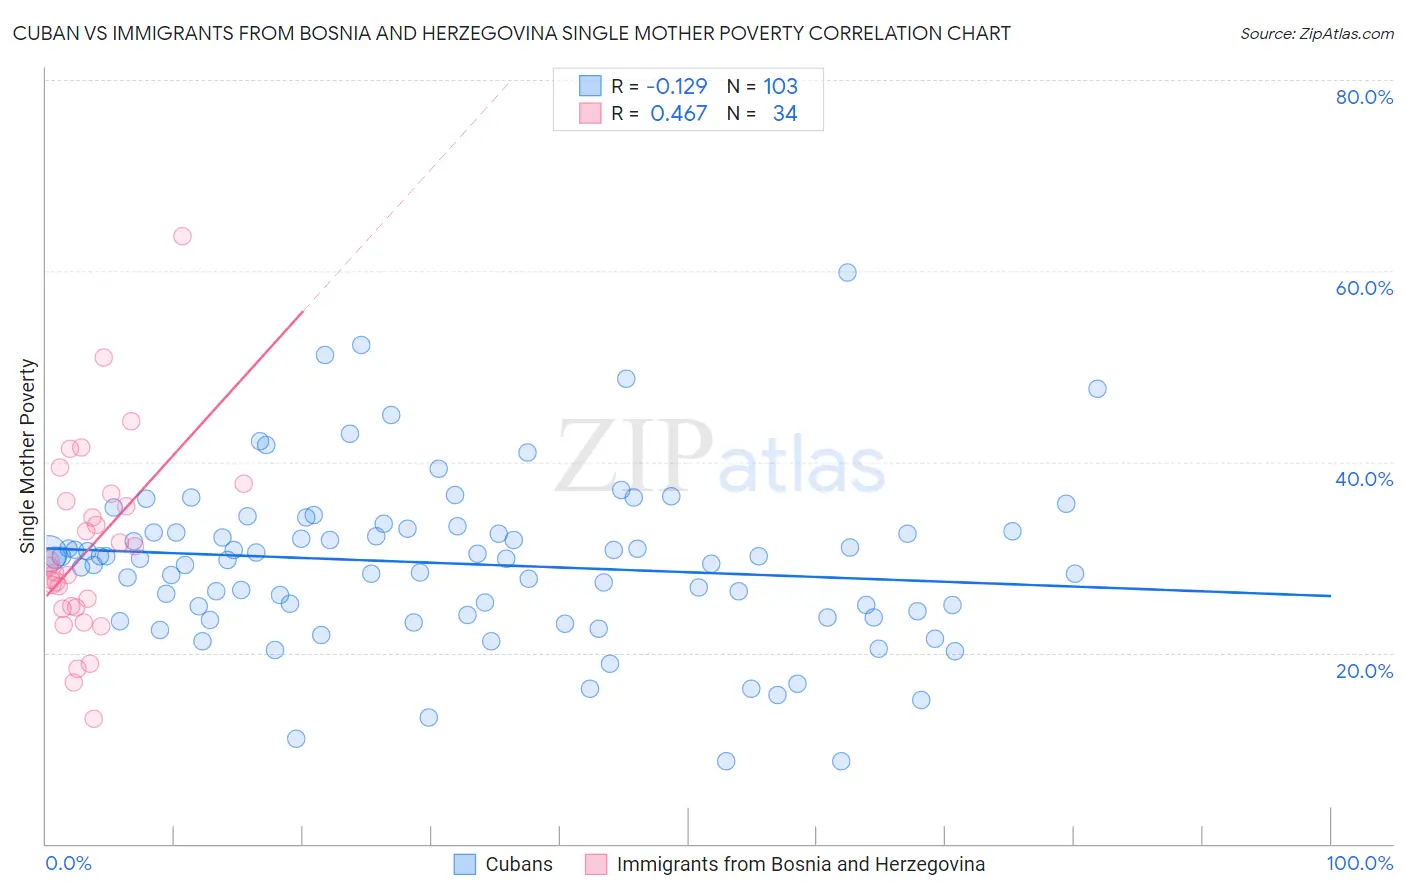 Cuban vs Immigrants from Bosnia and Herzegovina Single Mother Poverty